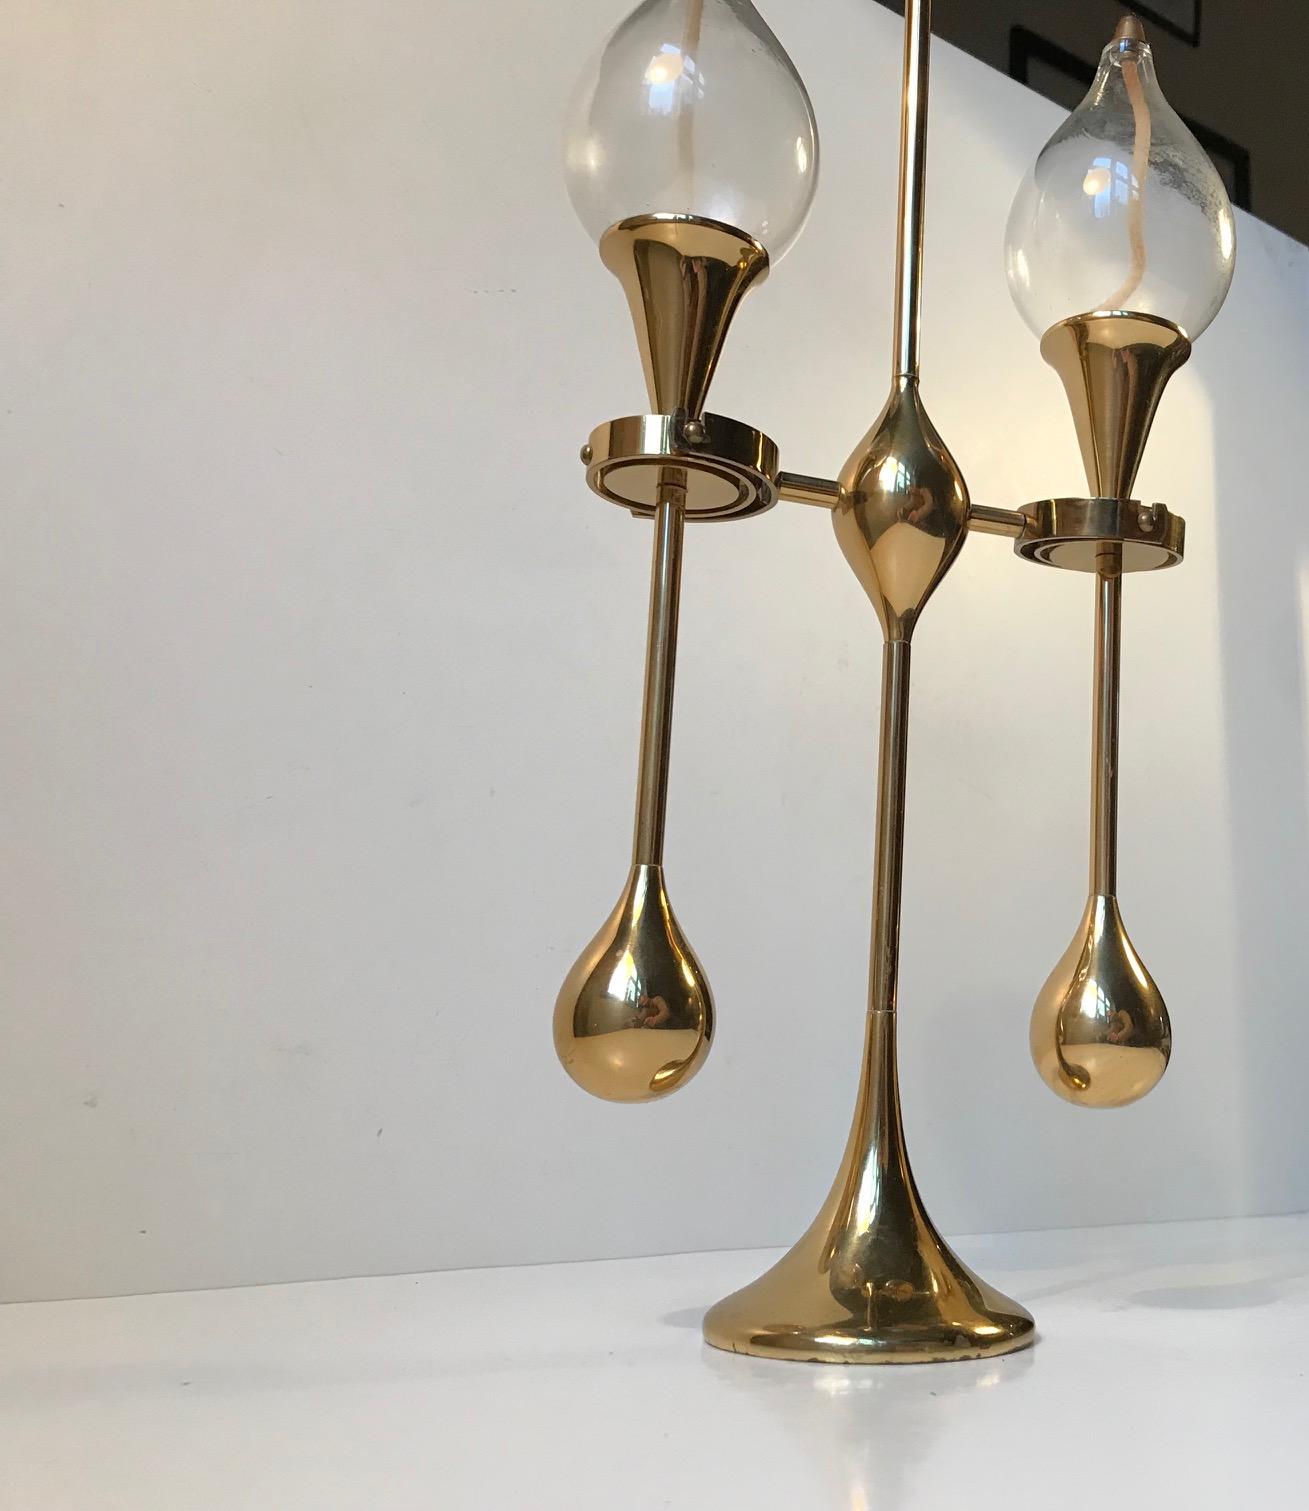 This is a large maritime hybrid table light that can function both as an oil lamp or a candle holder. It is made of polished brass and has organically drop shaped counter weights. These counter weights, together with the circular mechanisms half way